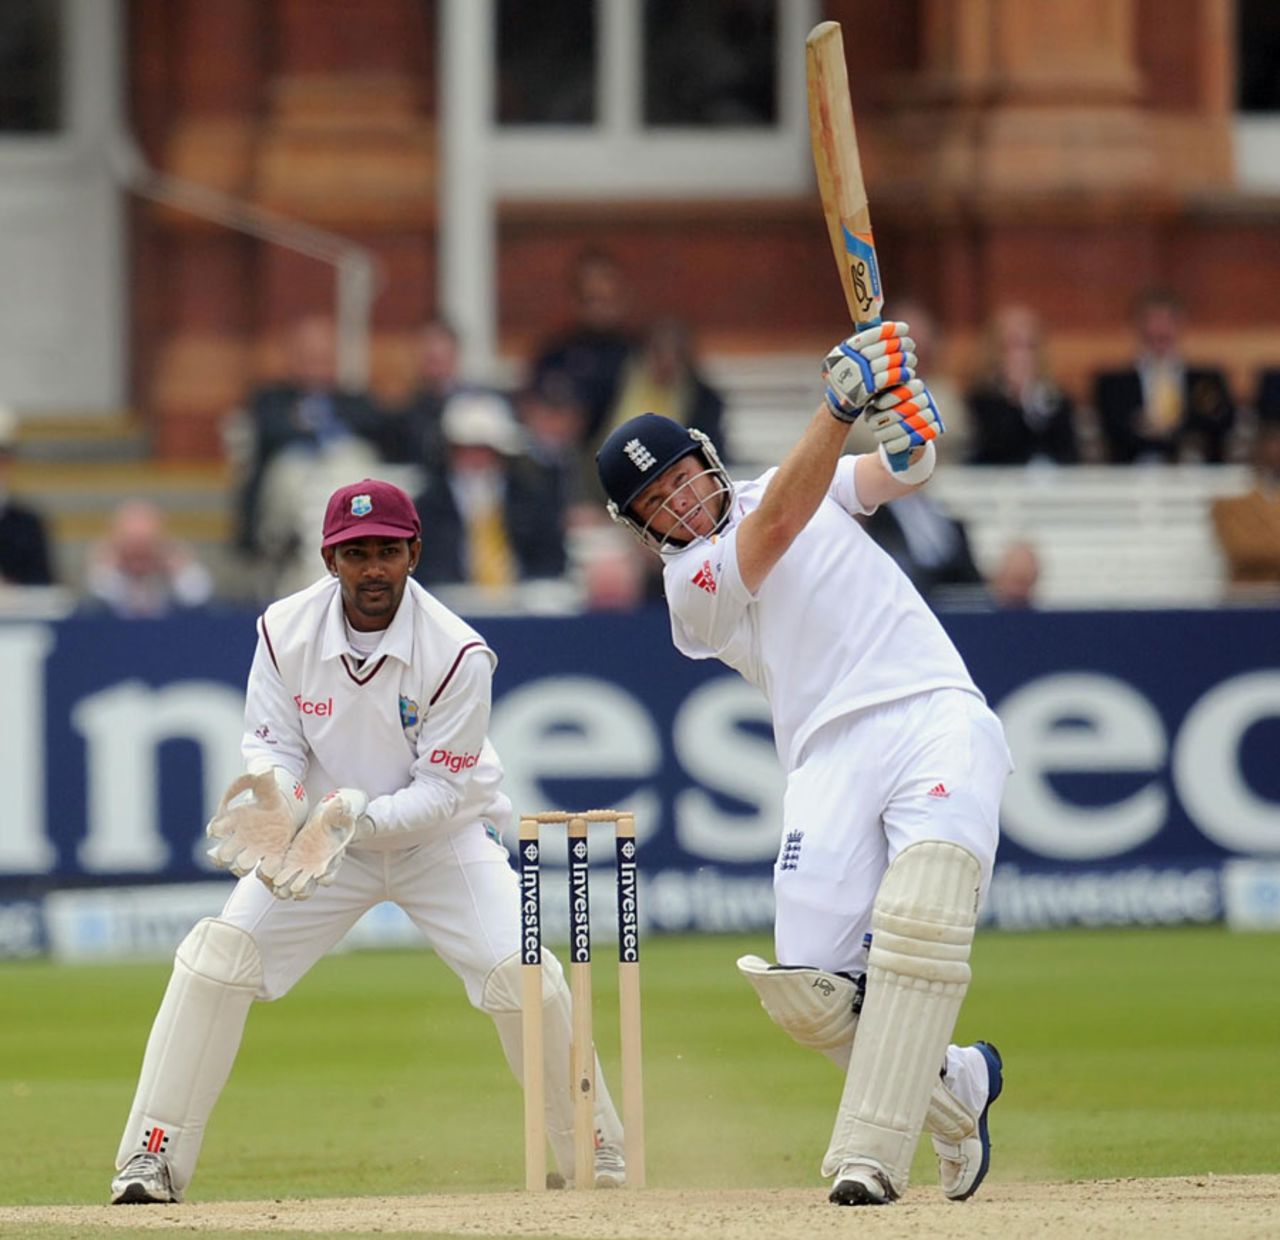 Ian Bell helped England to victory with a positive innings, England v West Indies, 1st Test, Lord's, 5th day, May 21, 2012